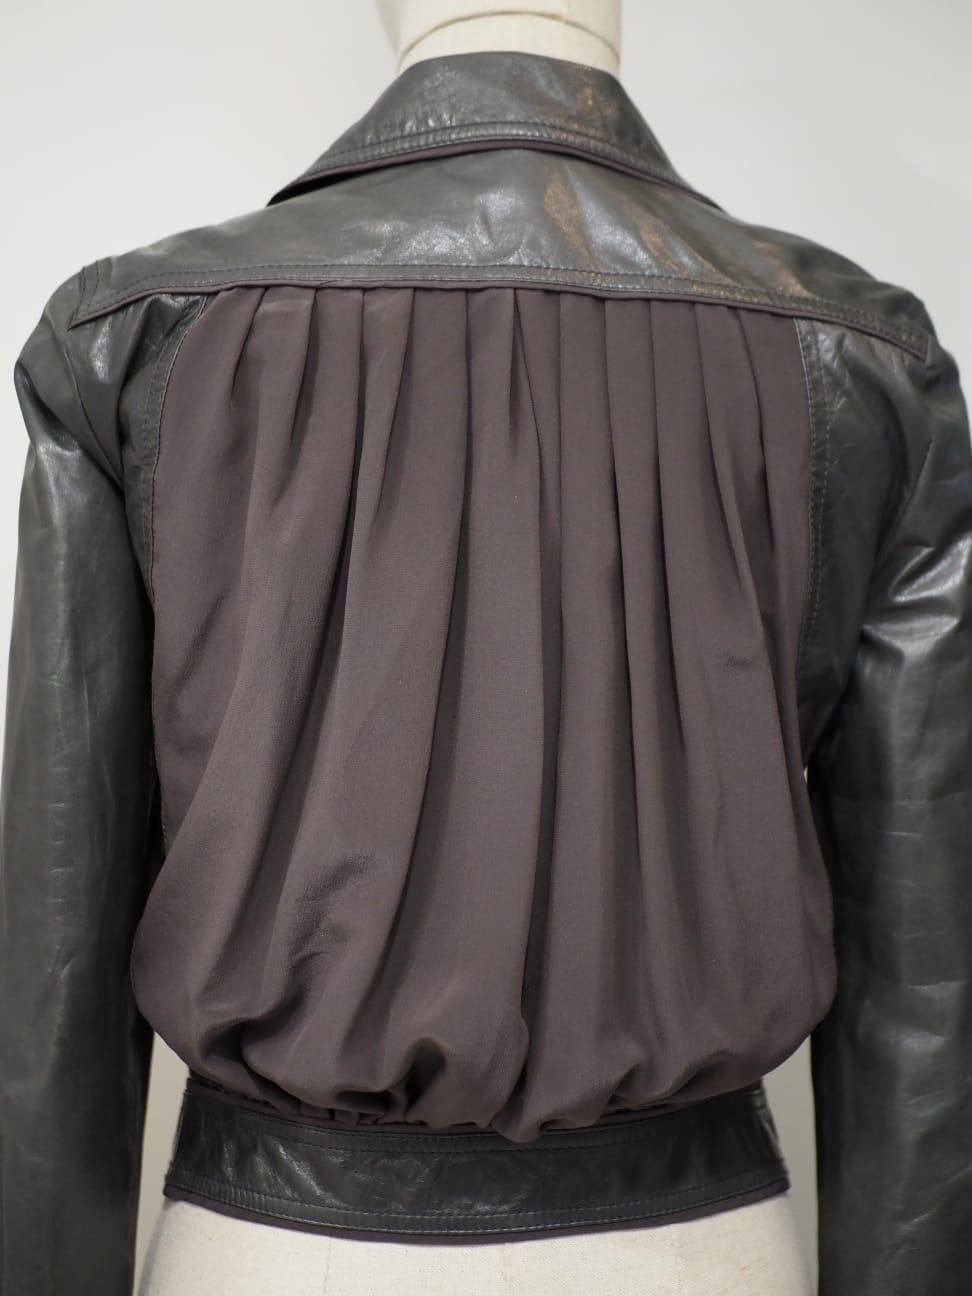 Fendi grey leather jacket totally made in Italy in size 38
Embellished on the back with silk
